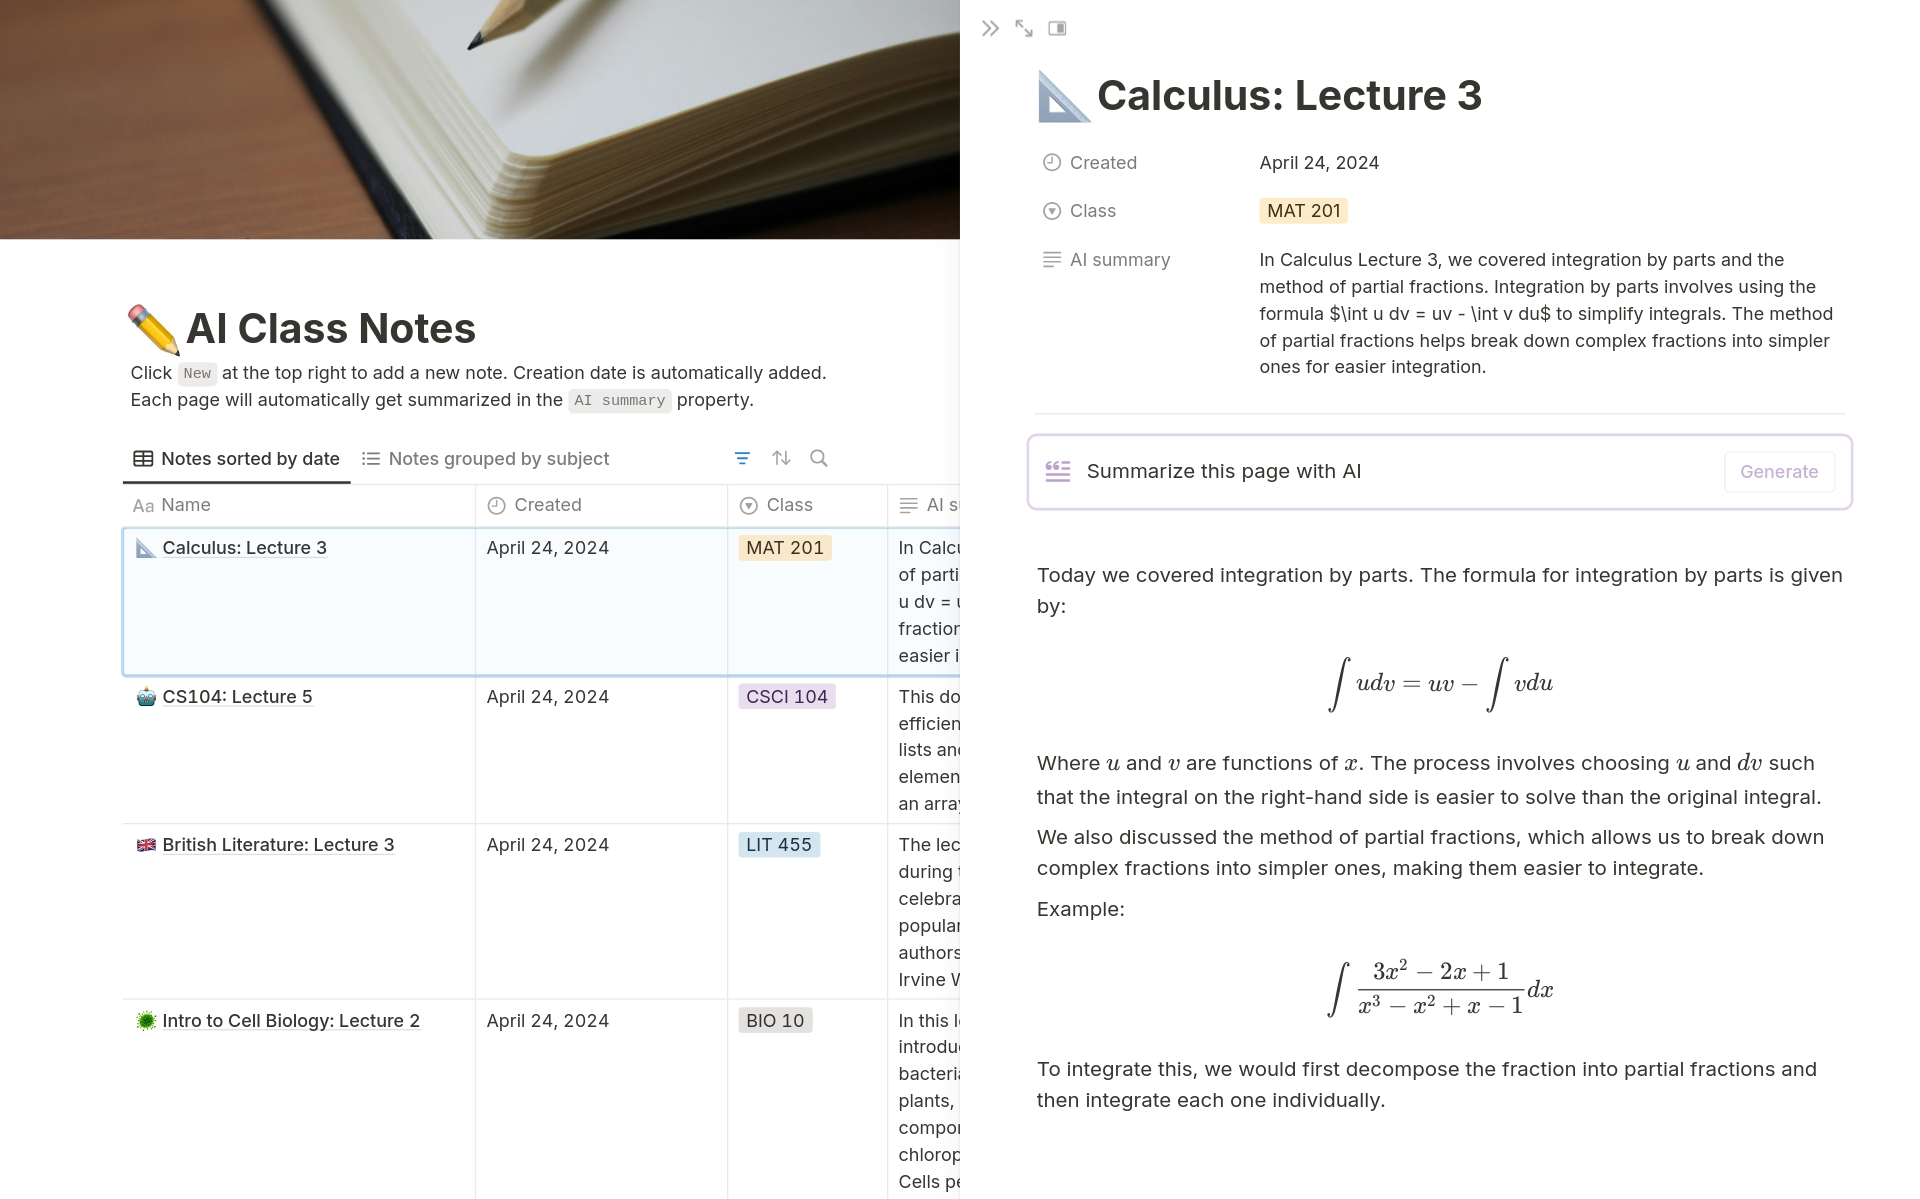 Stay on top of your academic game with the AI Class Notes Template in Notion. Perfect for students at any level, this comprehensive database helps you write, organize, and review your class notes effectively. Utilize the power of AI to generate concise summaries of your lectures,